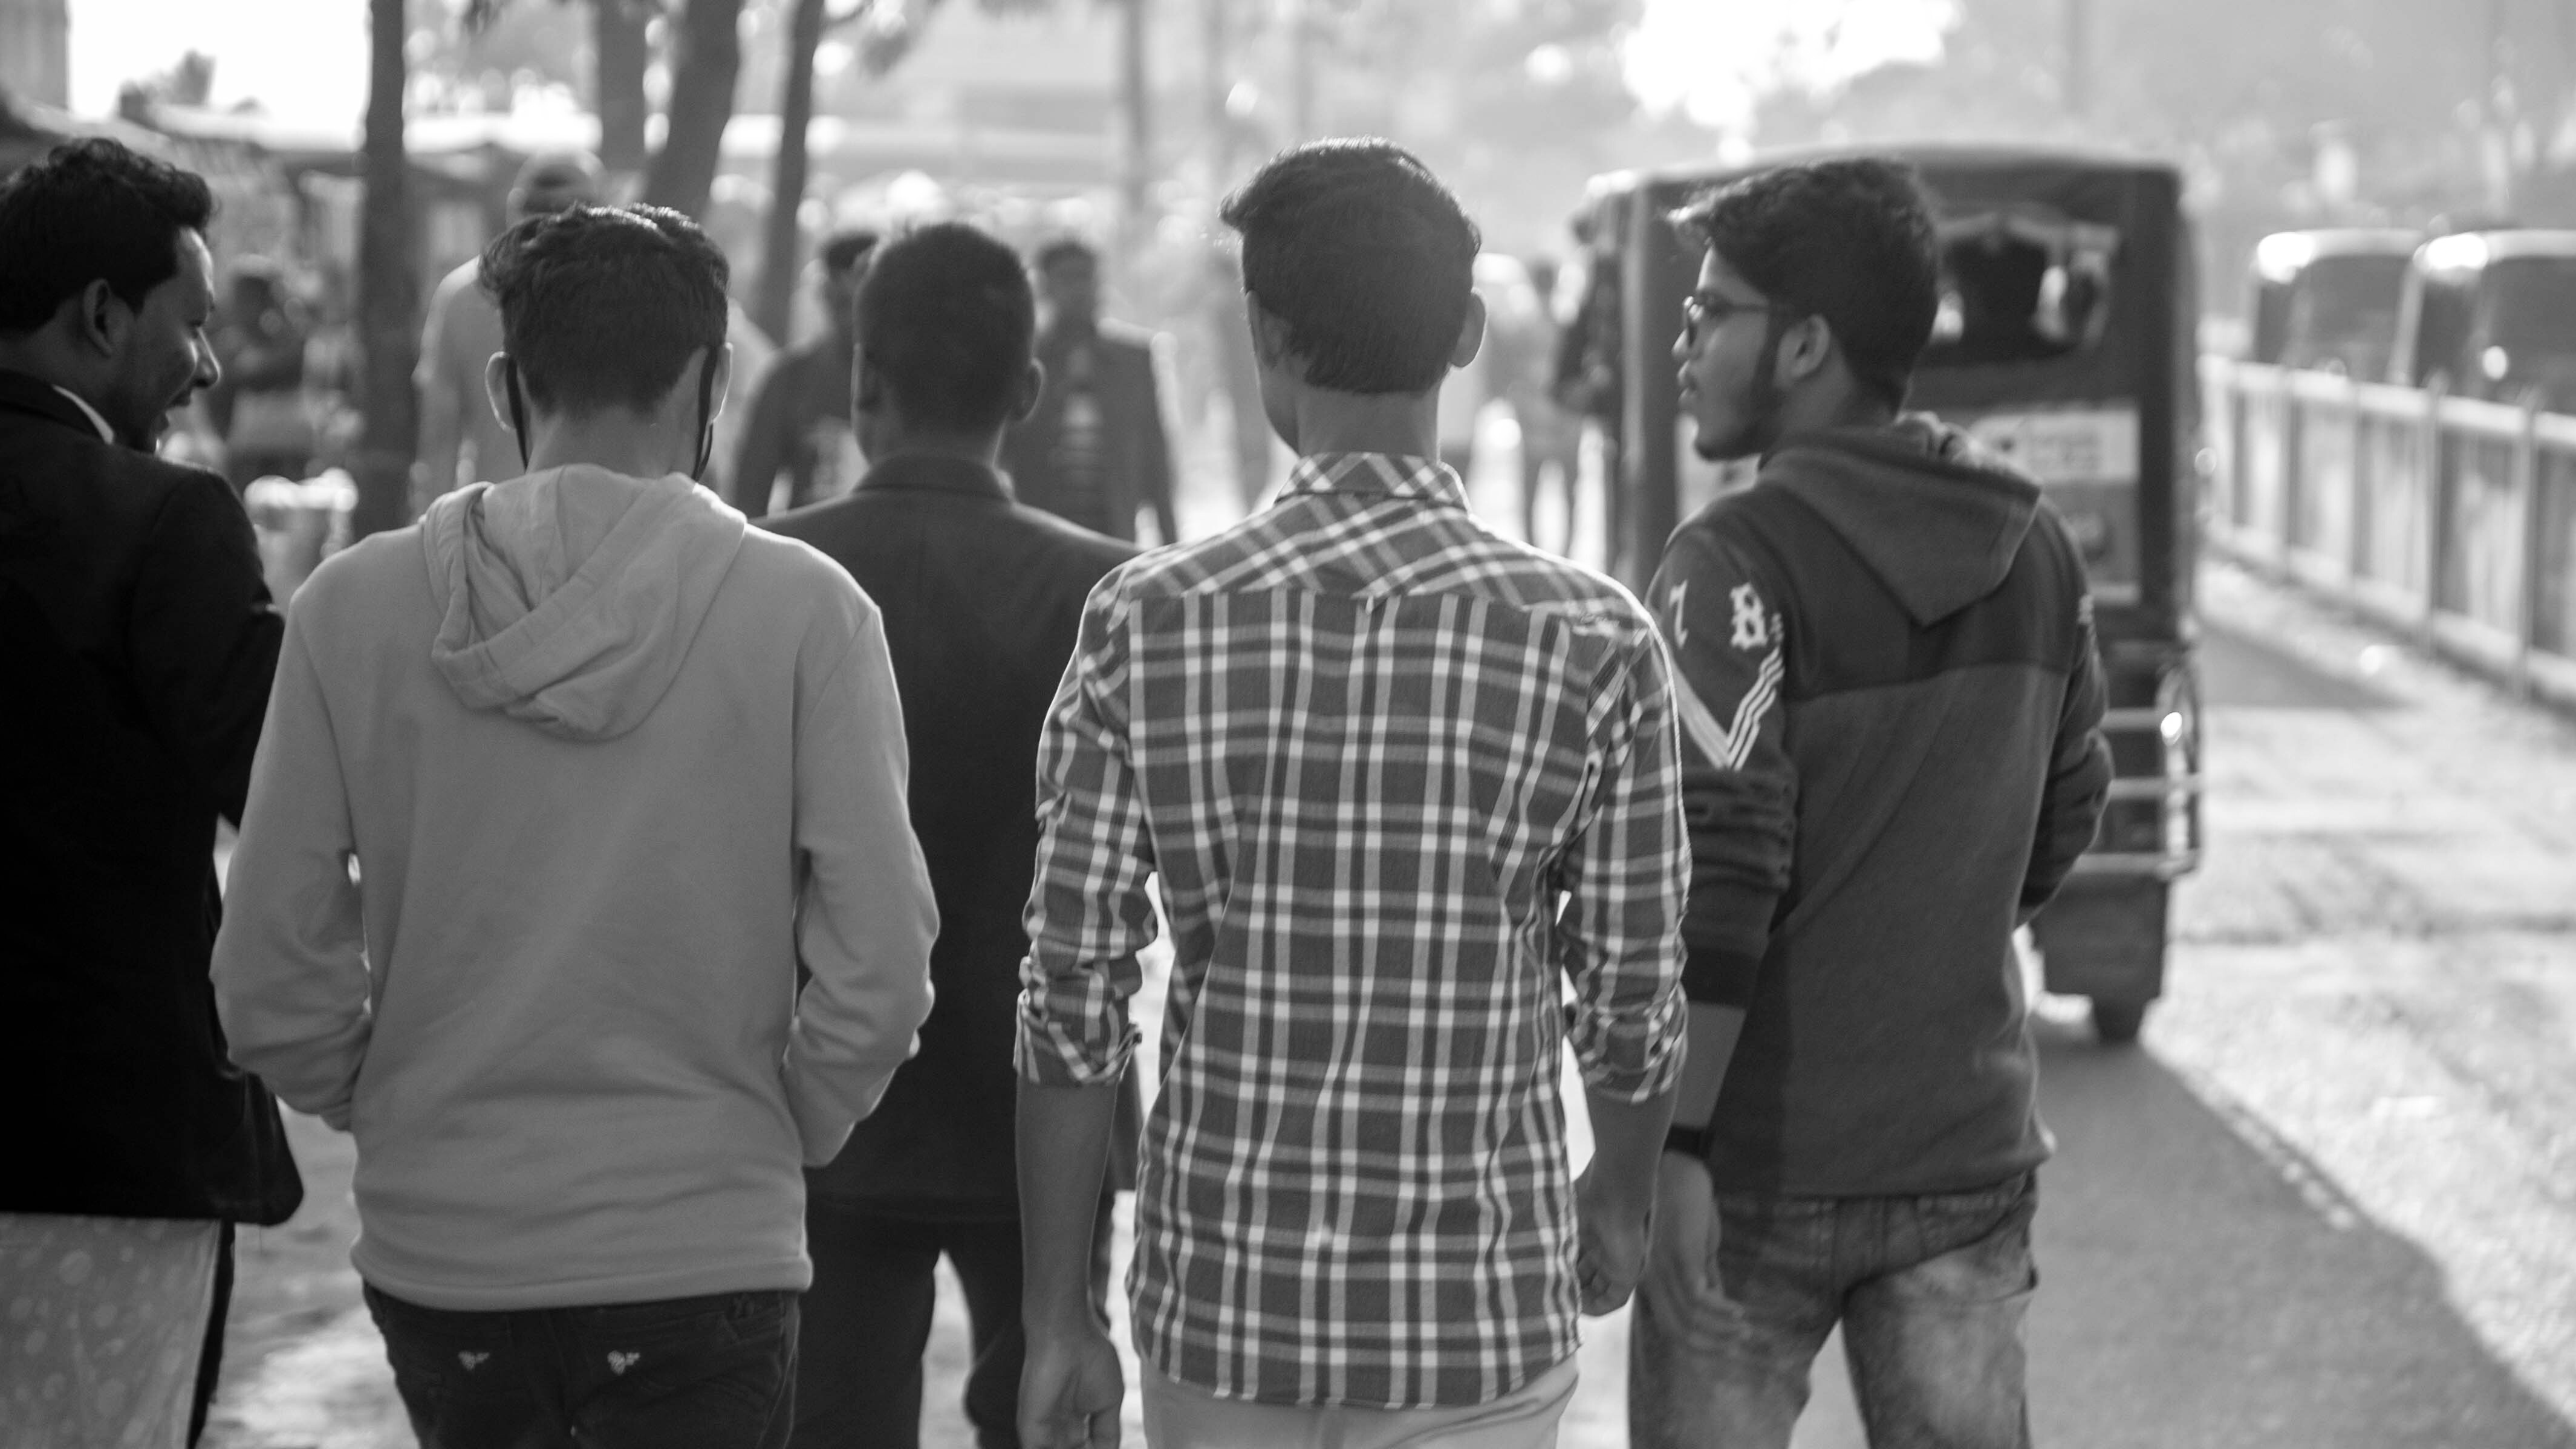 Group of young adults walking through street market black and white